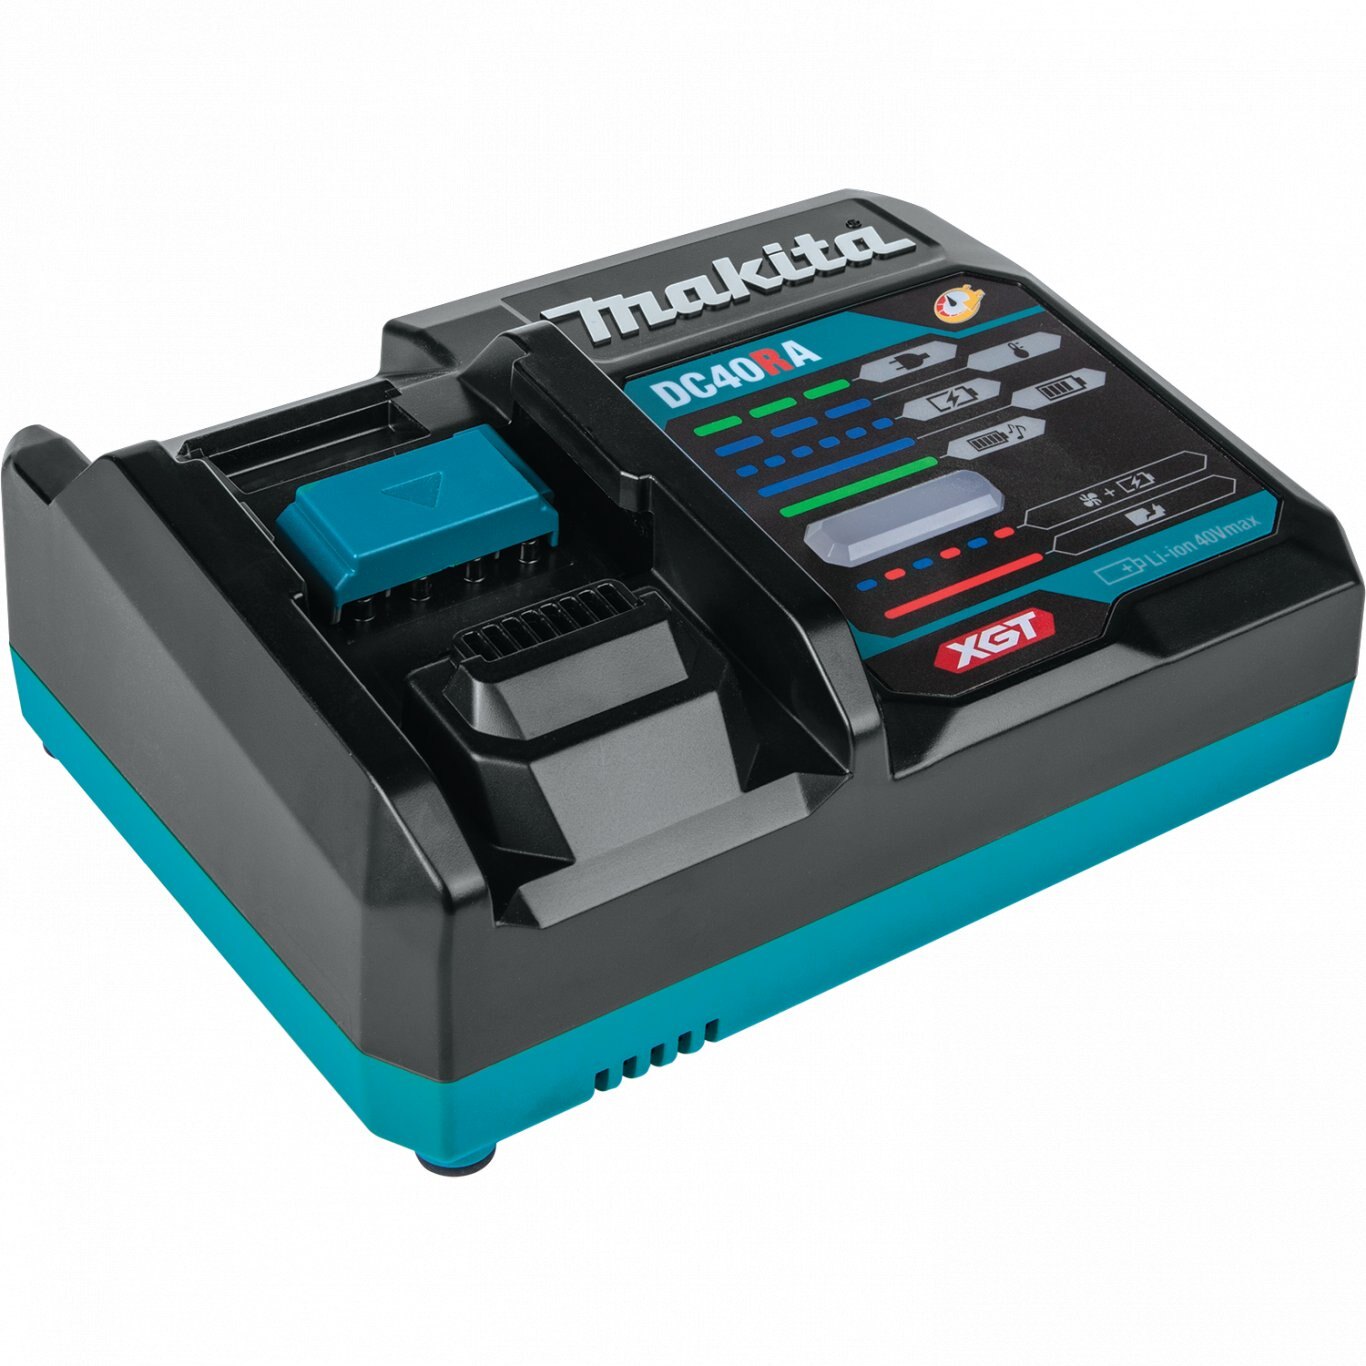 Makita 40V max XGT® Brushless Cordless 24 Single Sided Hedge Trimmer, Tool Only